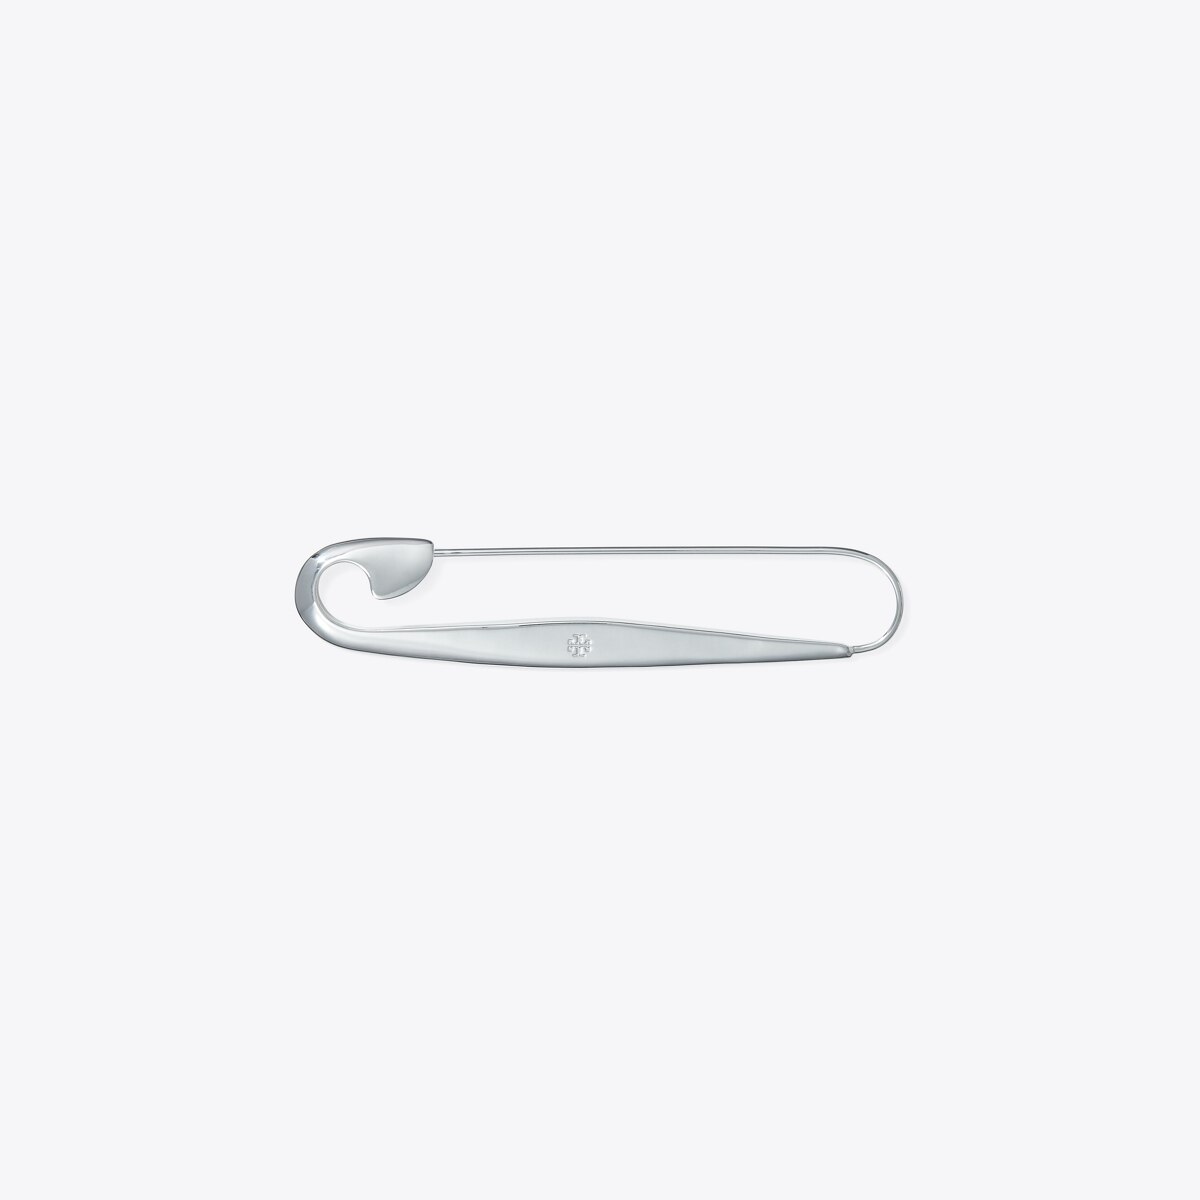 Safety Pin Brooch: Women's Accessories, Hair Pins